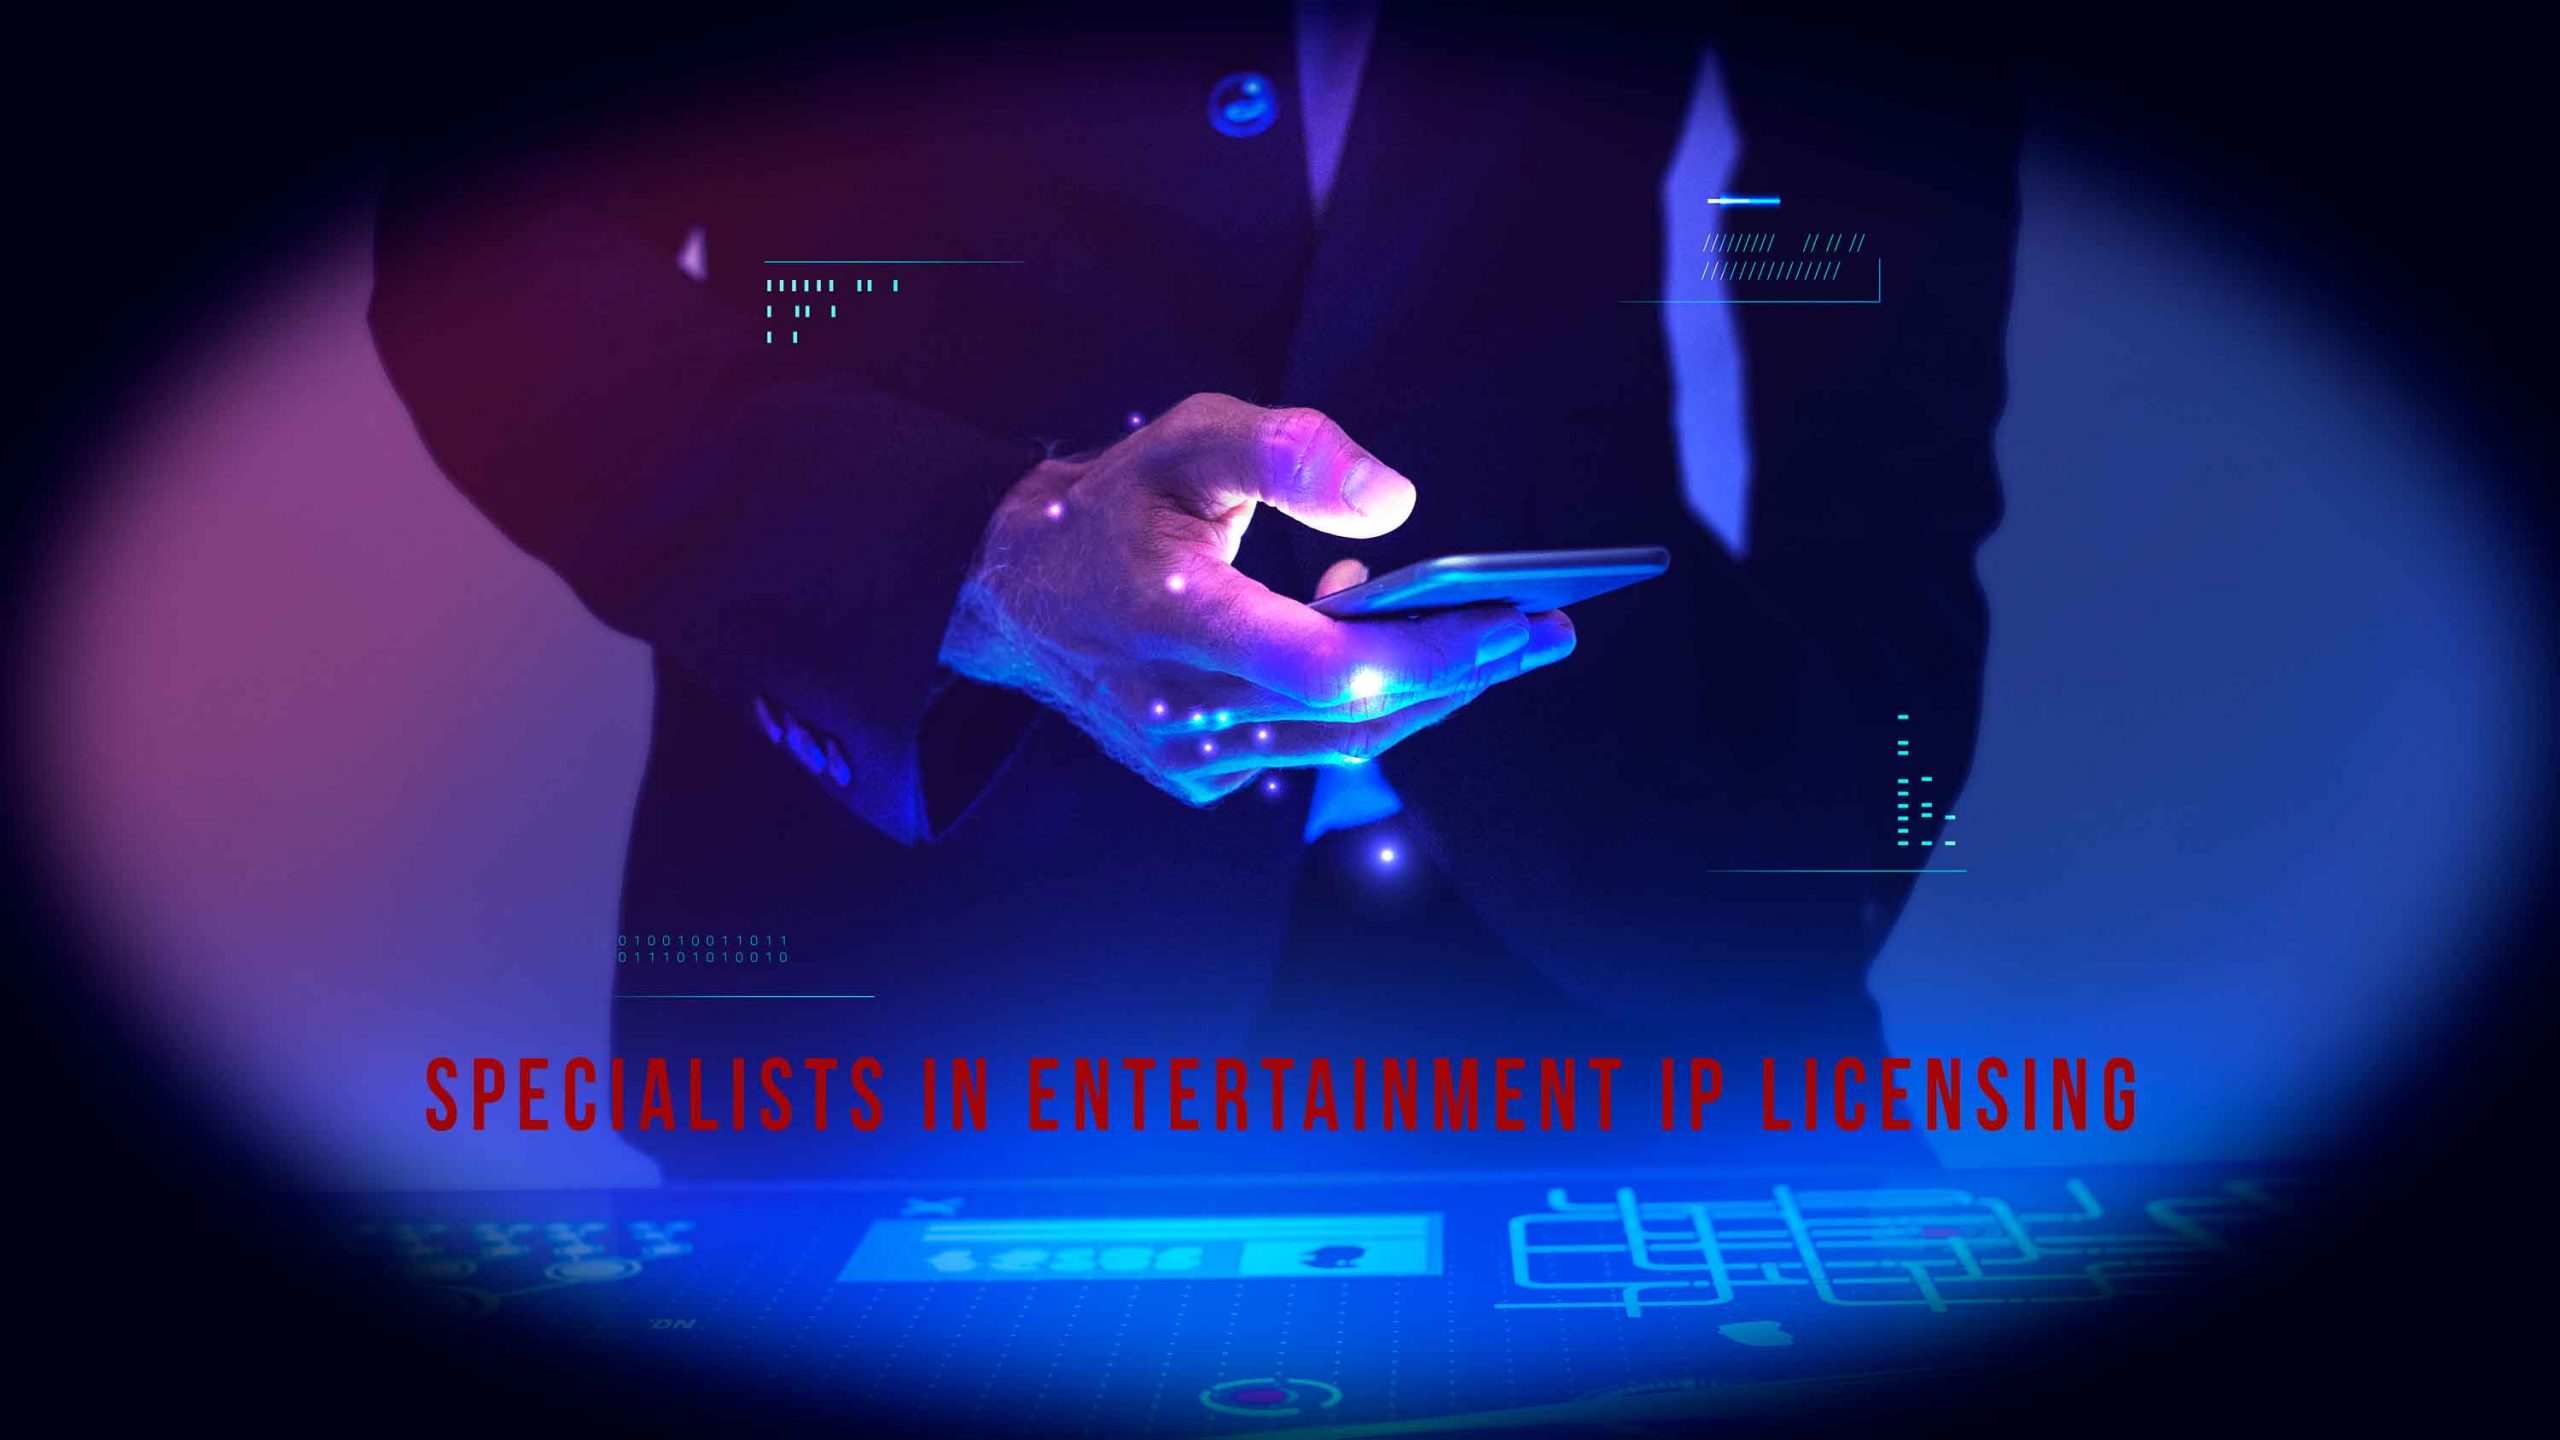 Specialists in Entertainment IP Licensing